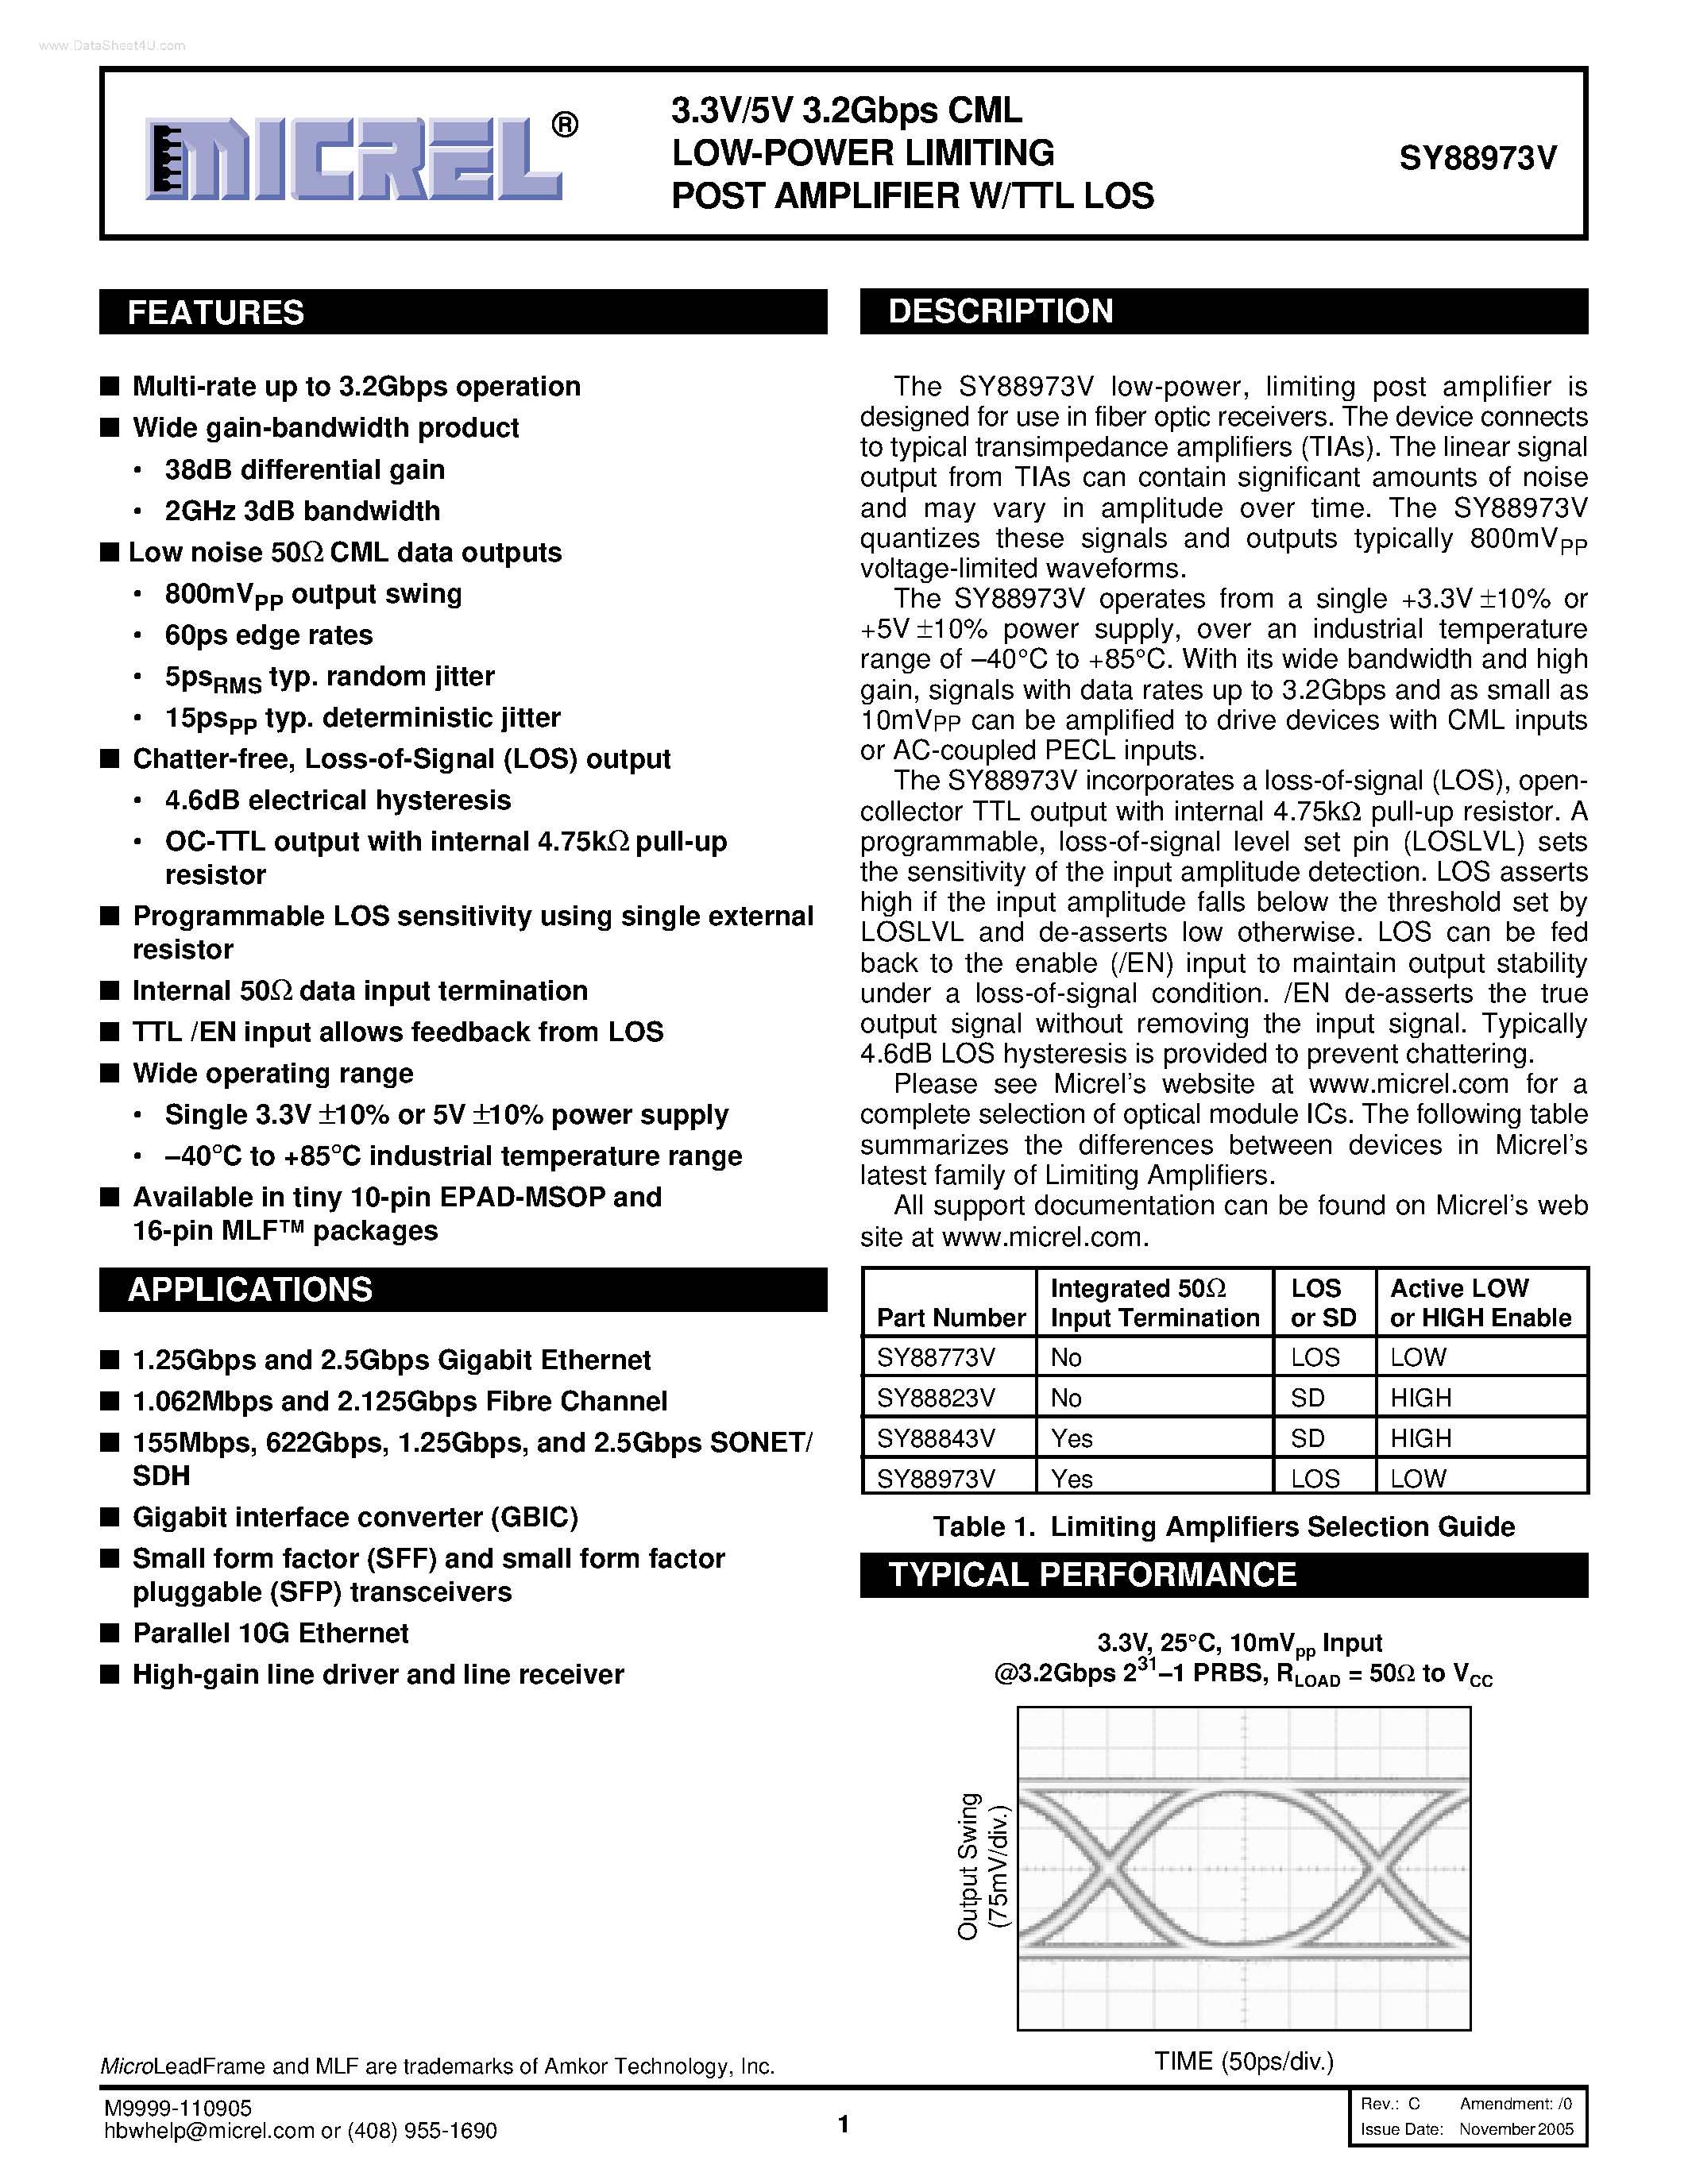 Datasheet SY88973V - CML LOW-POWER LIMITING POST AMPLIFIER W/TTL LOS page 1